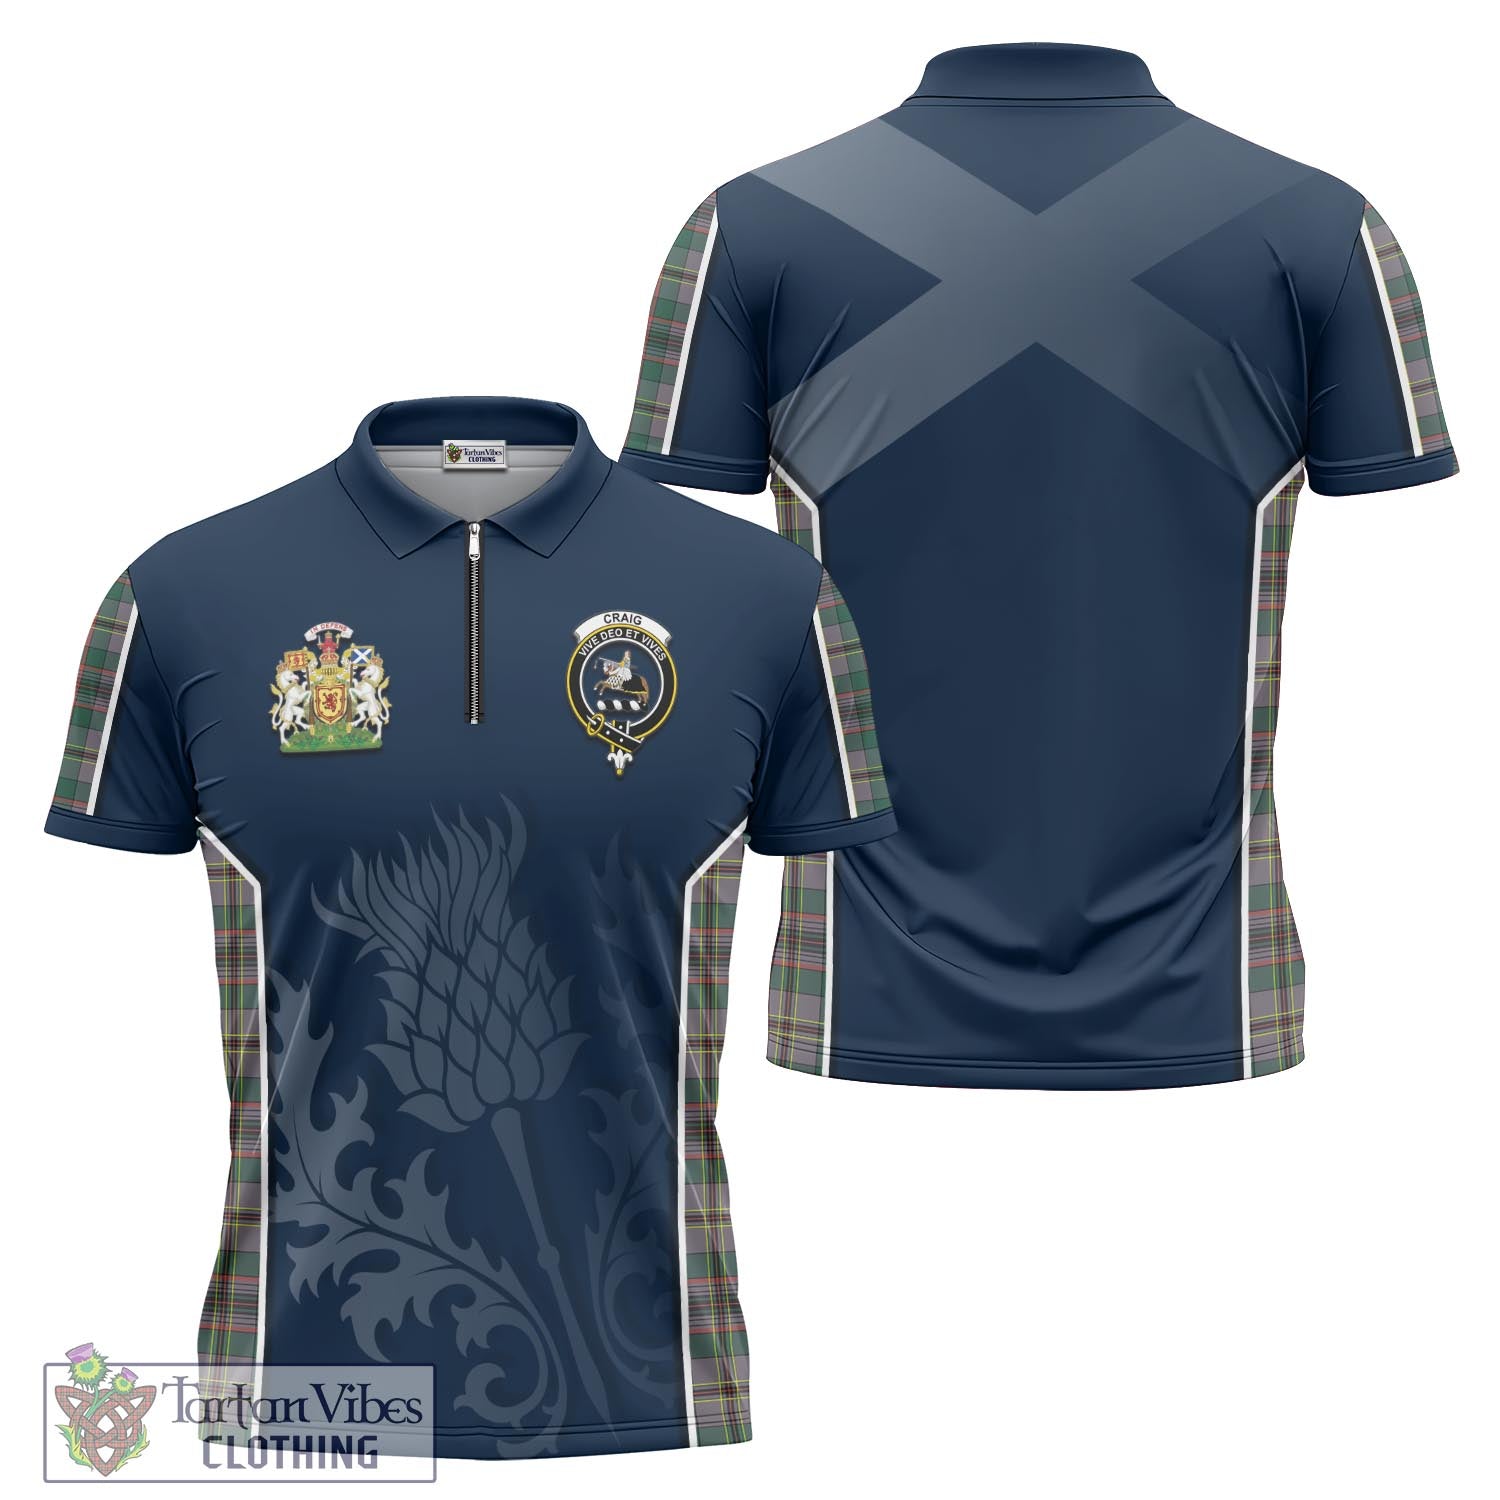 Tartan Vibes Clothing Craig Ancient Tartan Zipper Polo Shirt with Family Crest and Scottish Thistle Vibes Sport Style